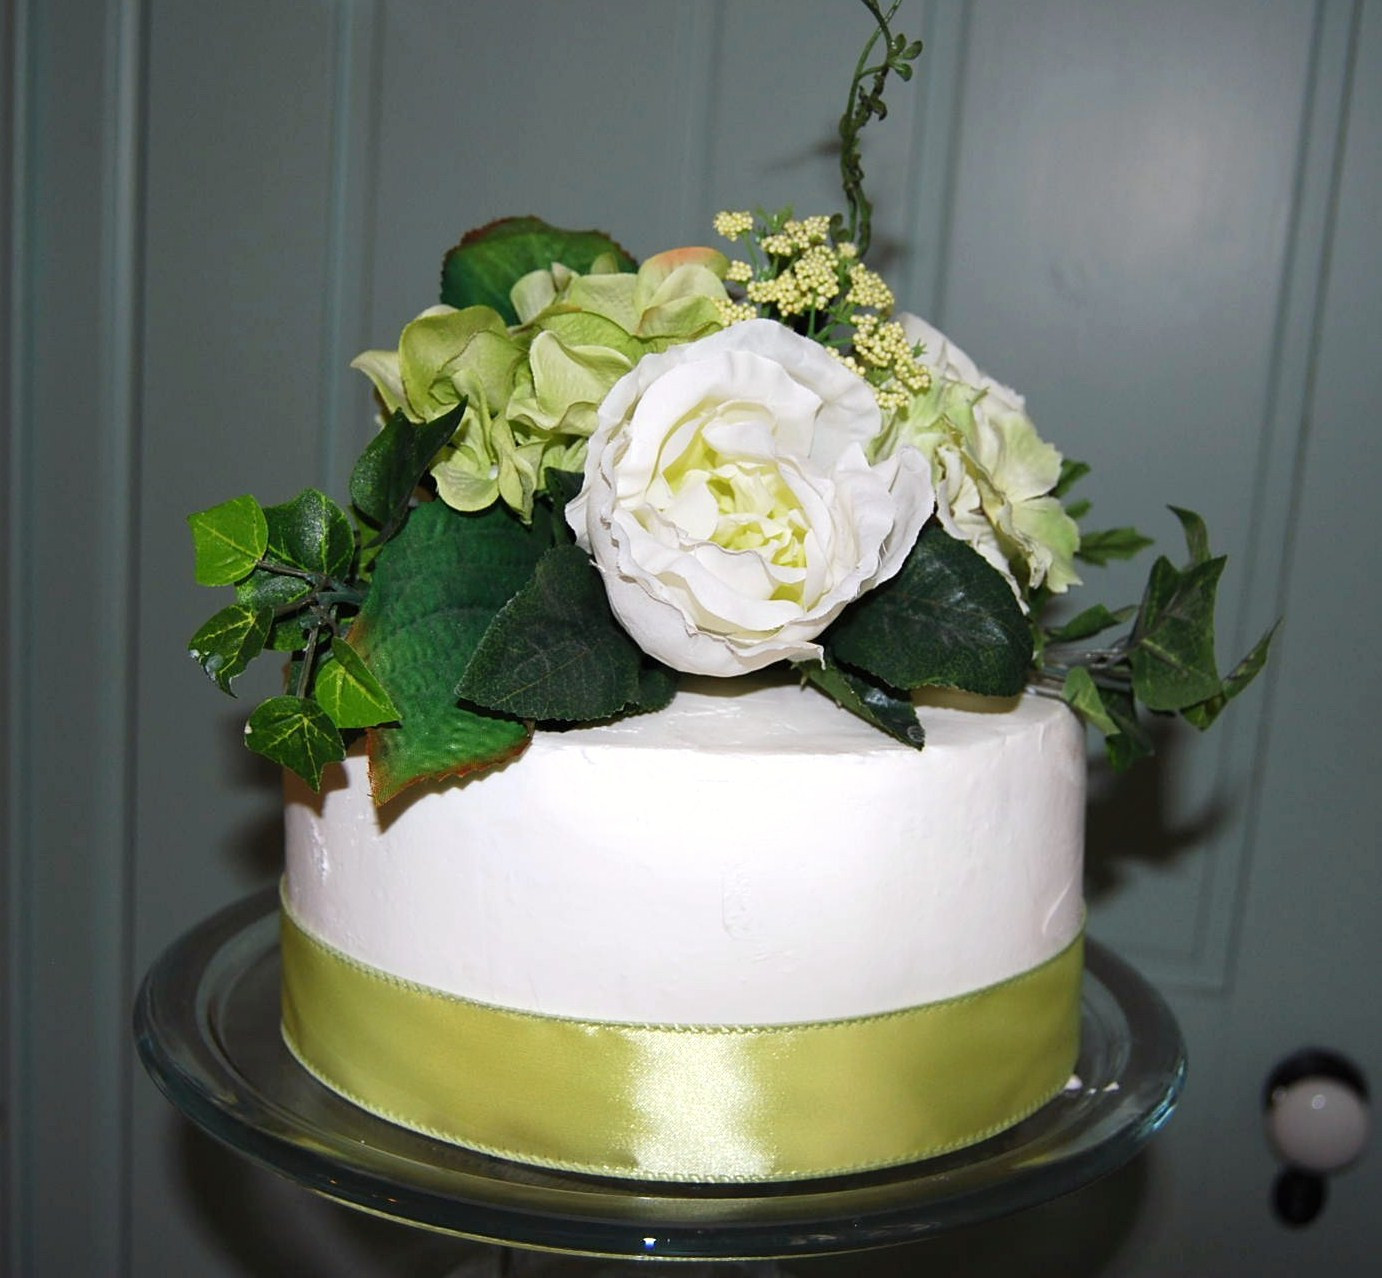 Wedding Cake Recipes For Tiered Cakes
 Define Your Sign How To Make A Three Tiered Wedding Cake